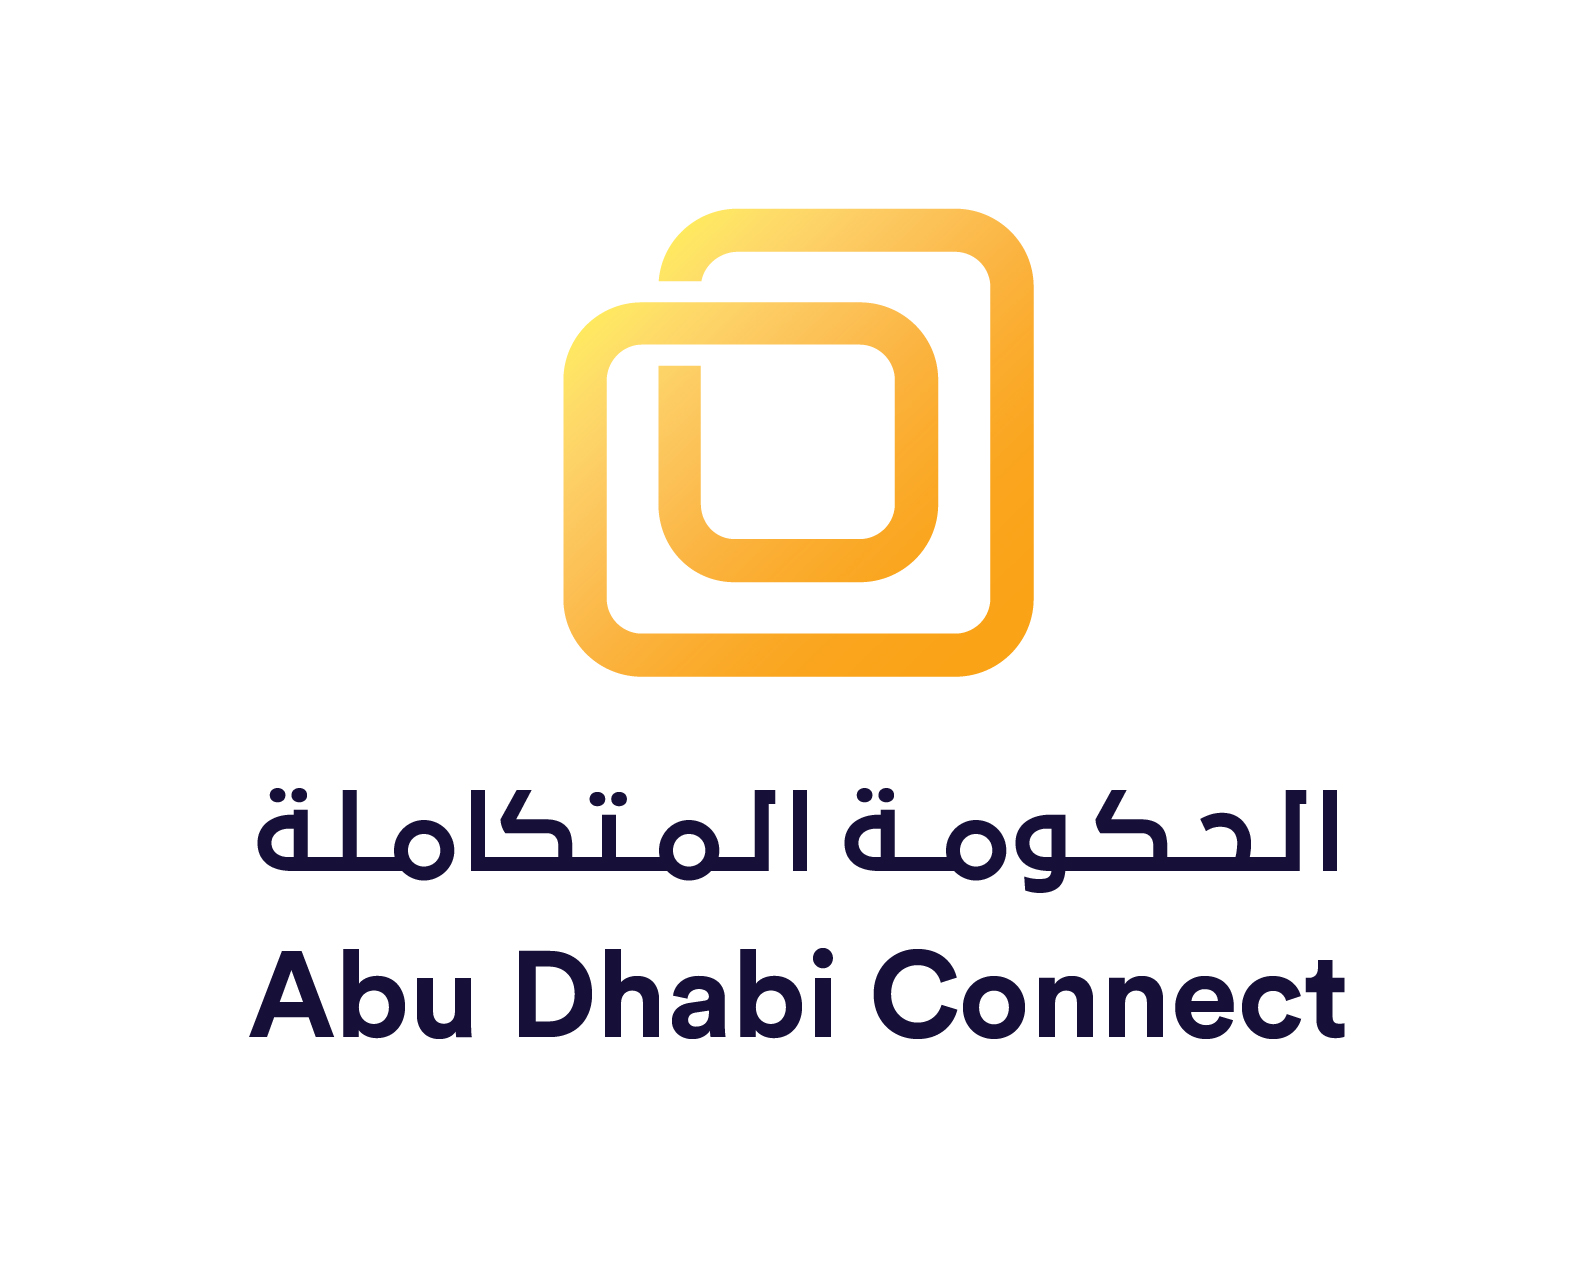 Abu Dhabi Digital Authority Launches ‘Abu Dhabi Connect’ Project